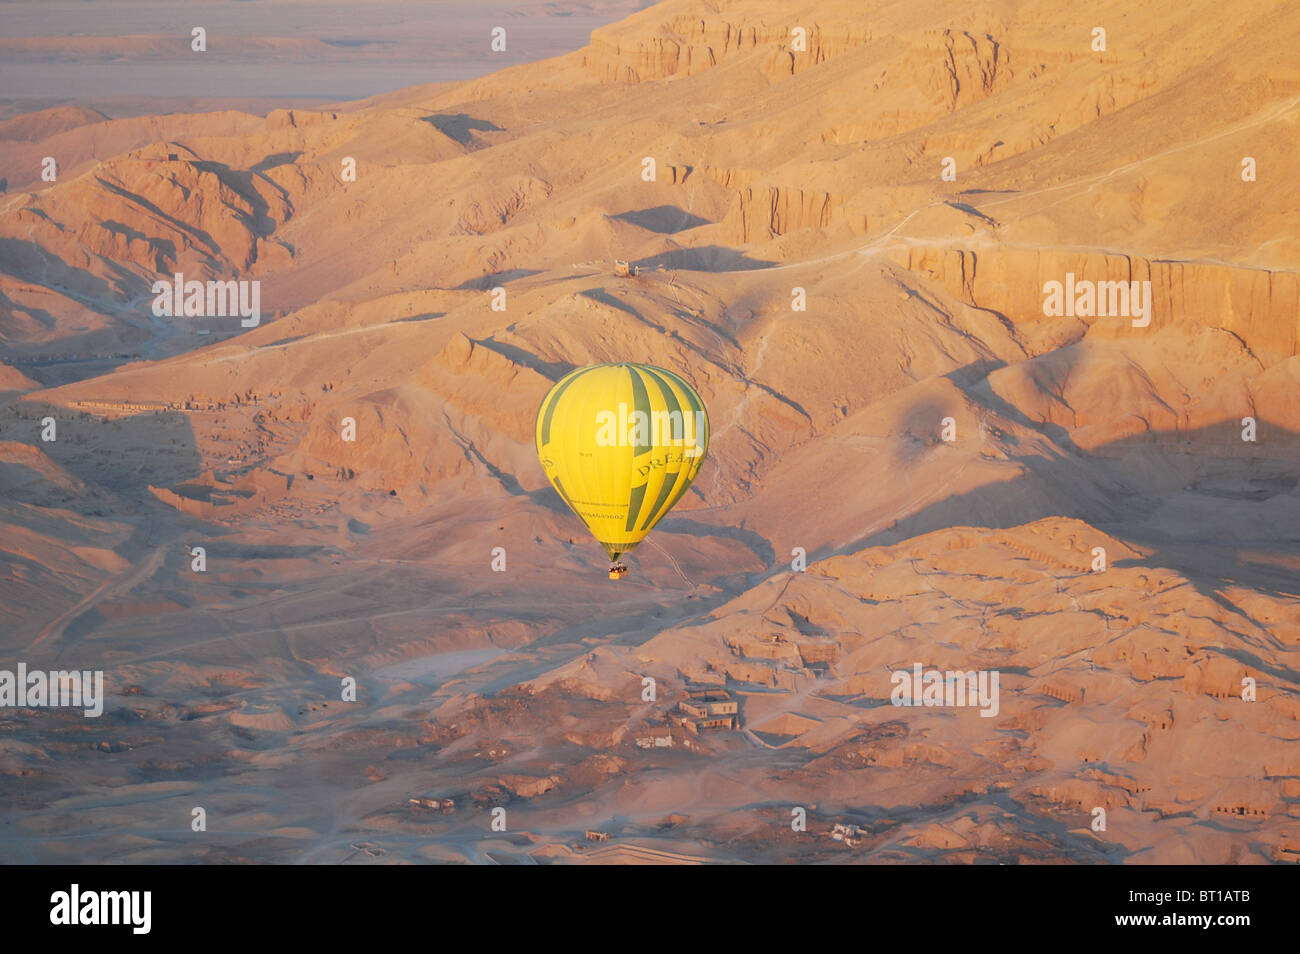 Hot air balloon ride above the Valley of the Kings, Luxor, Egypt at dawn Stock Photo